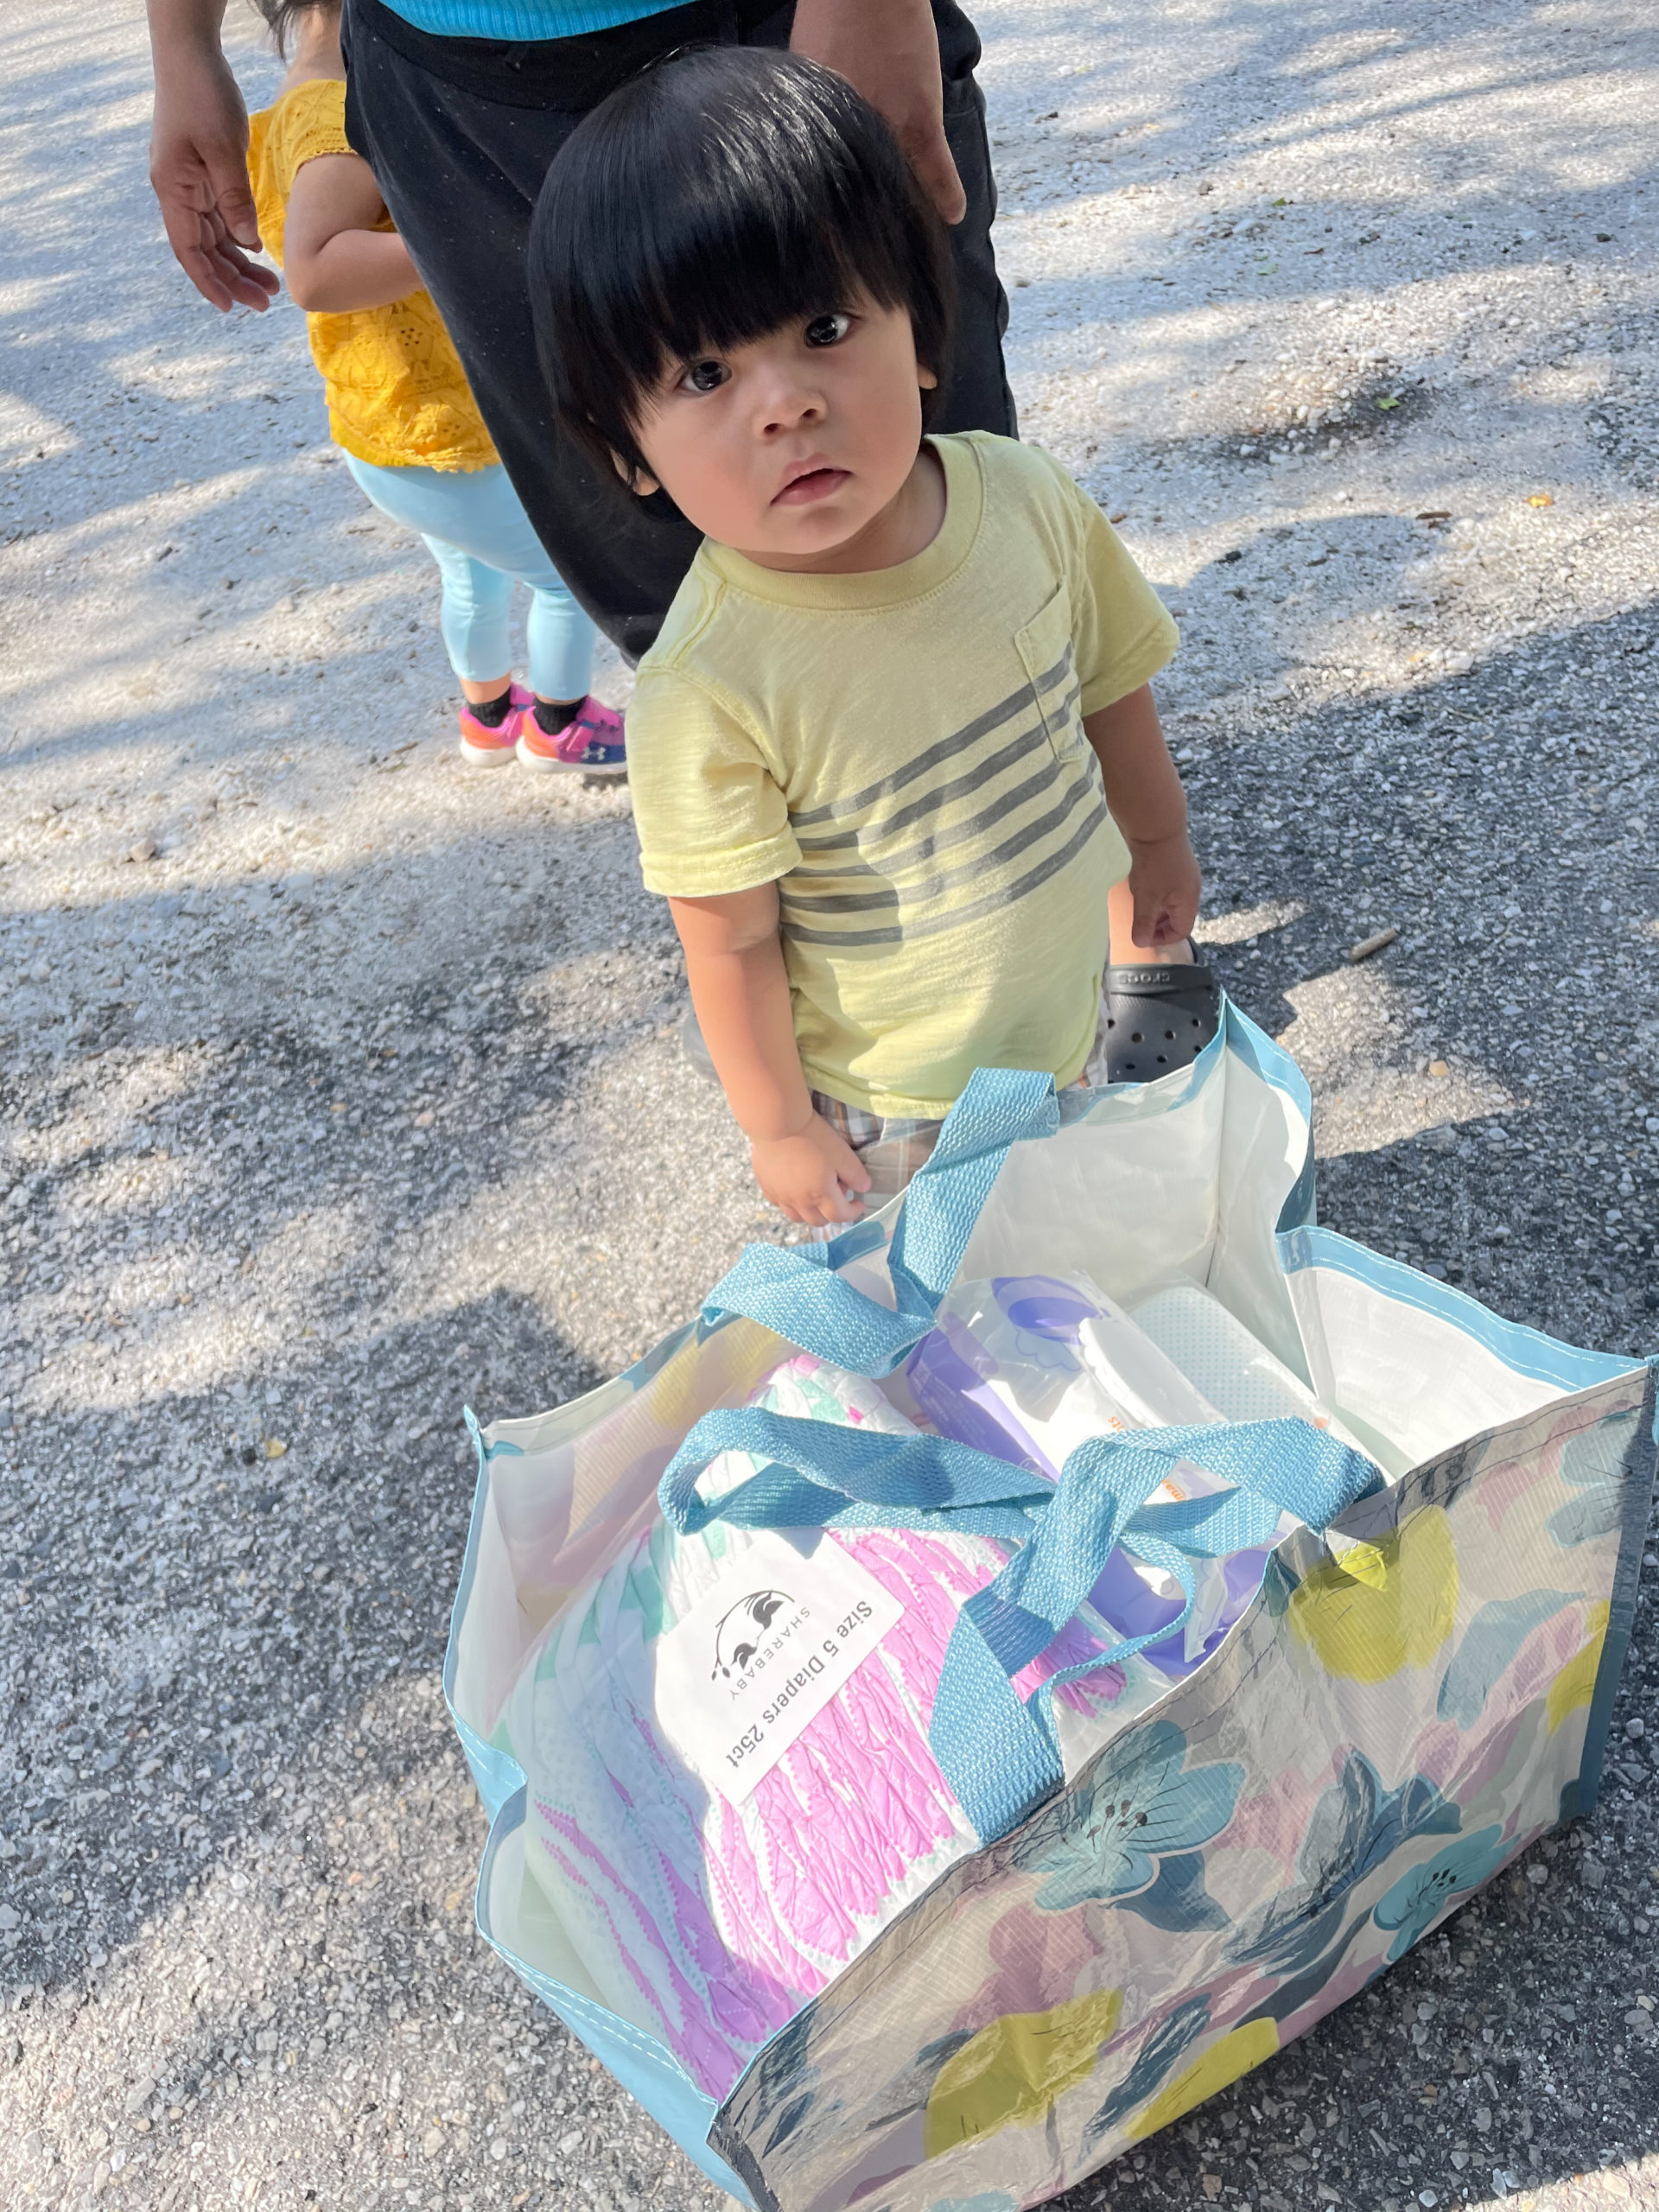 A young child stands above a tote filled with diapers.